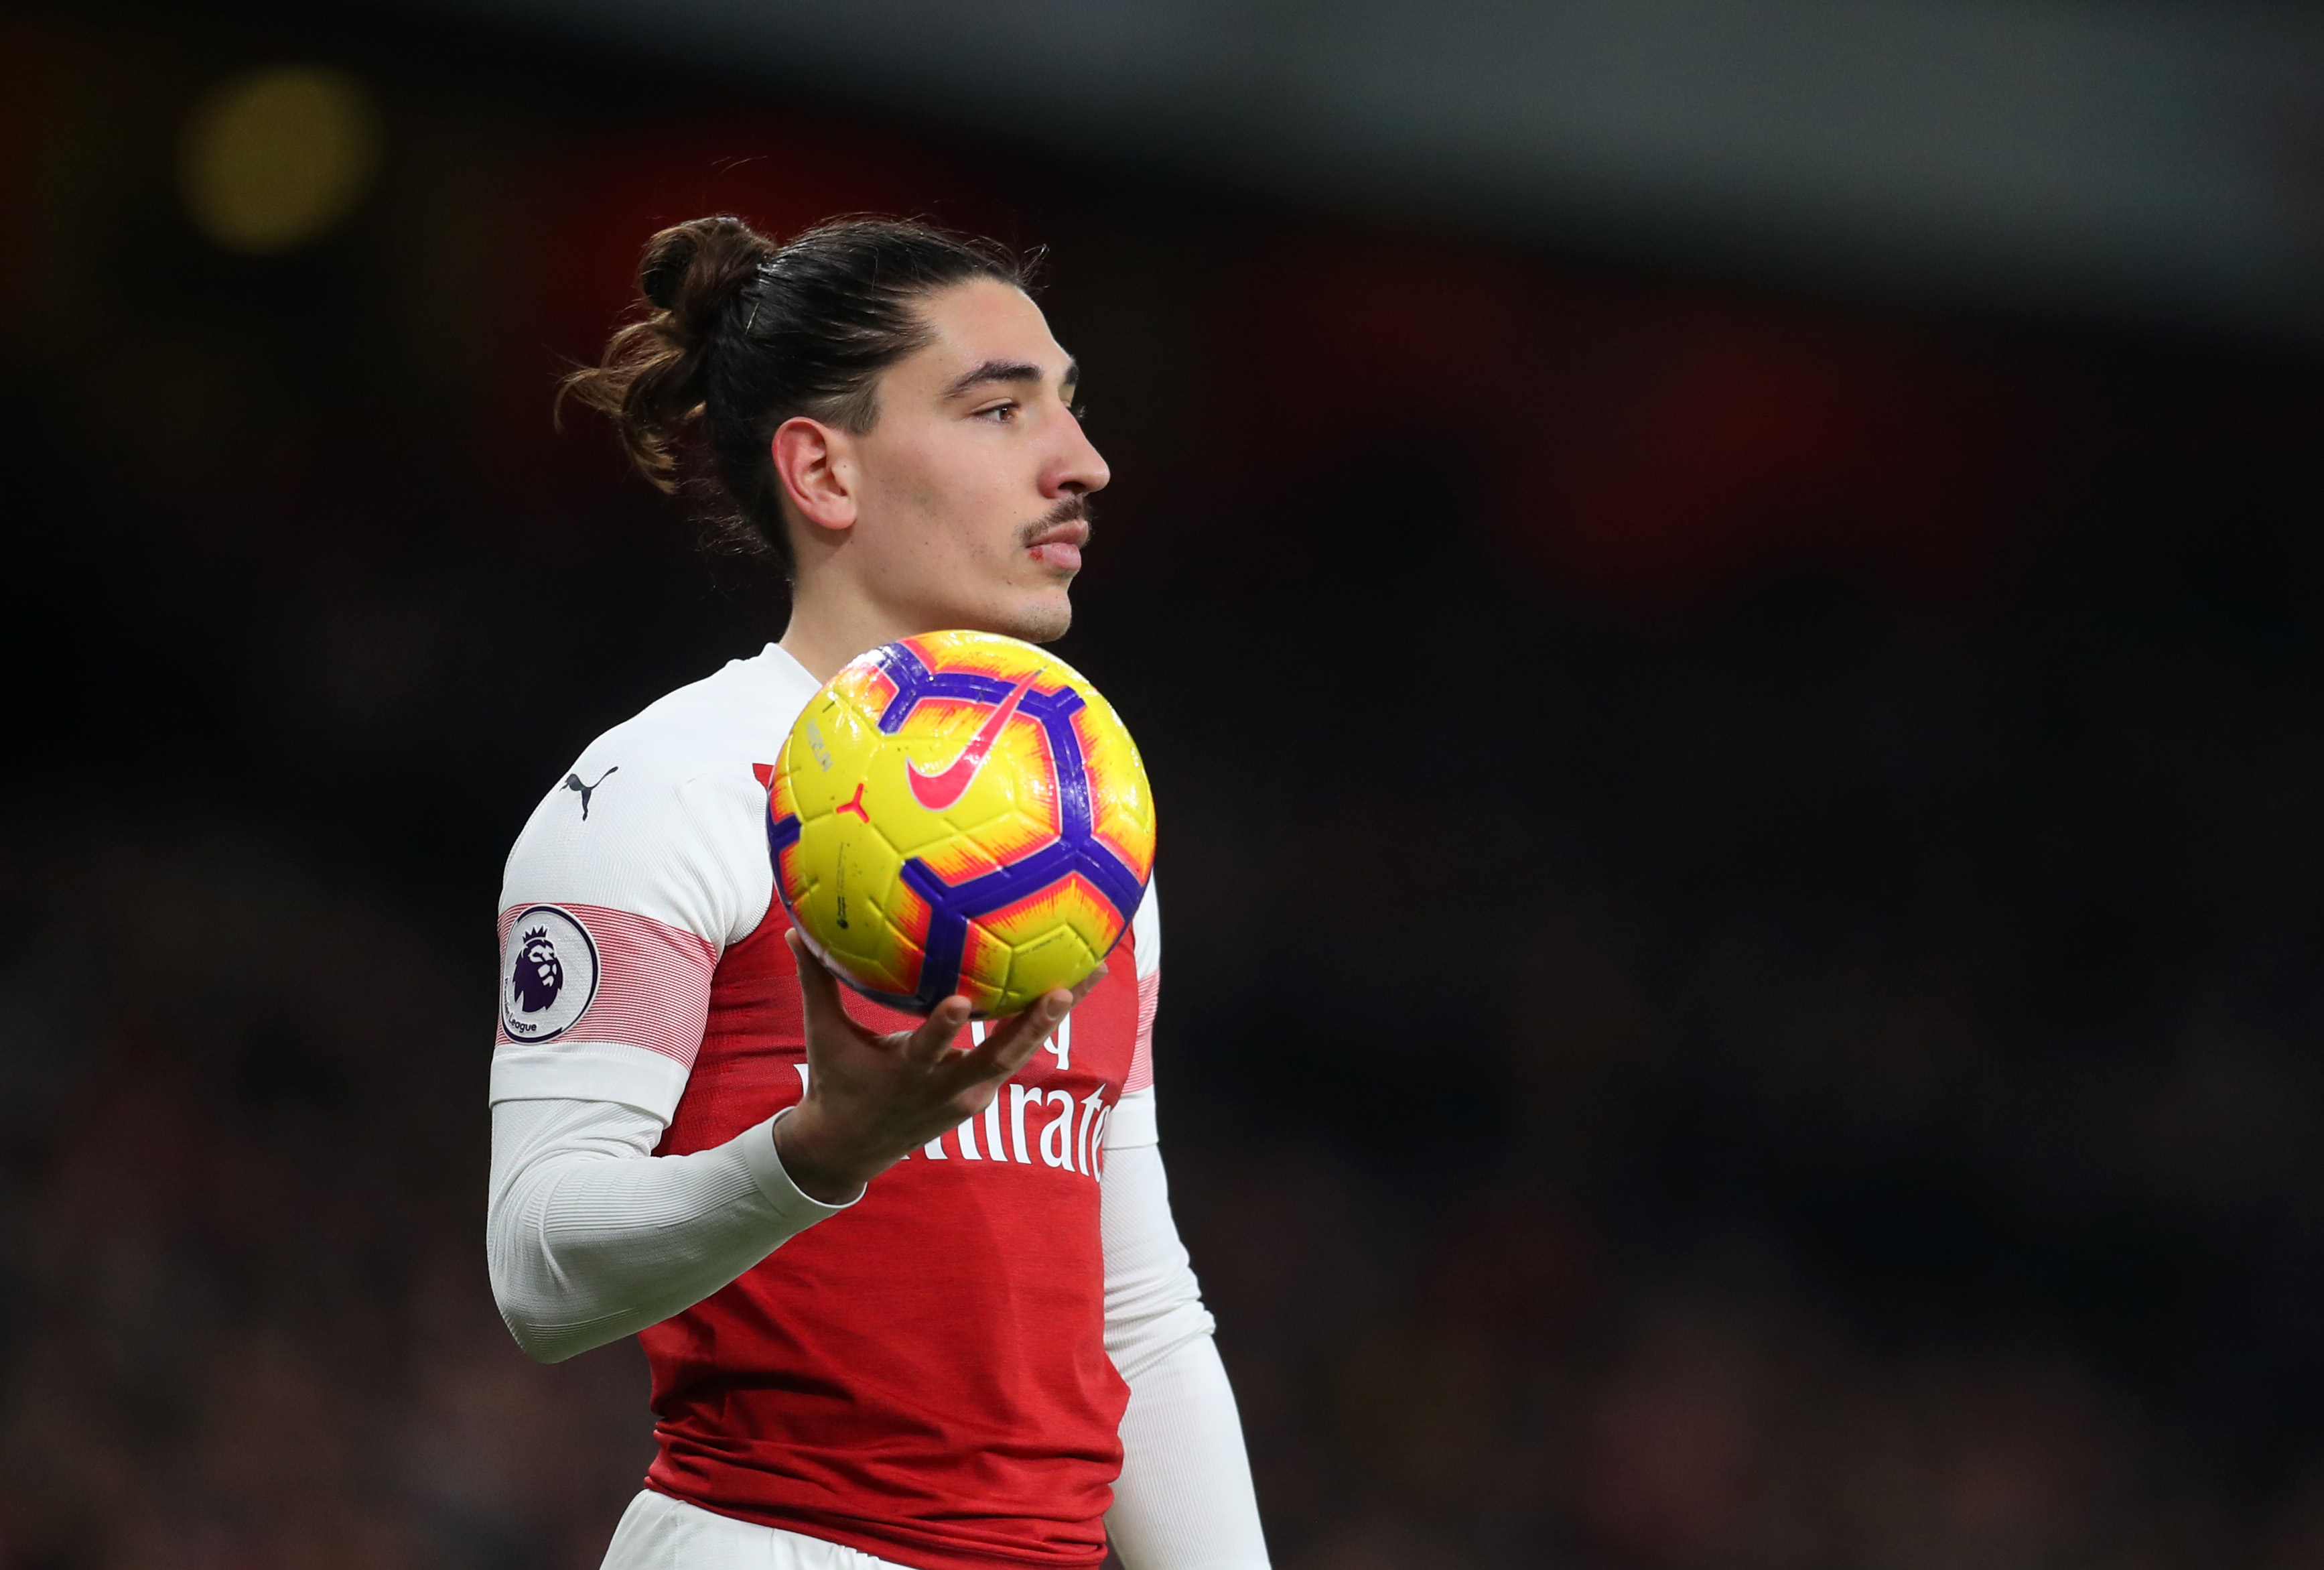 LONDON, ENGLAND - JANUARY 19: Hector Bellerin of Arsenal during the Premier League match between Arsenal FC and Chelsea FC at Emirates Stadium on January 19, 2019 in London, United Kingdom. (Photo by Catherine Ivill/Getty Images)